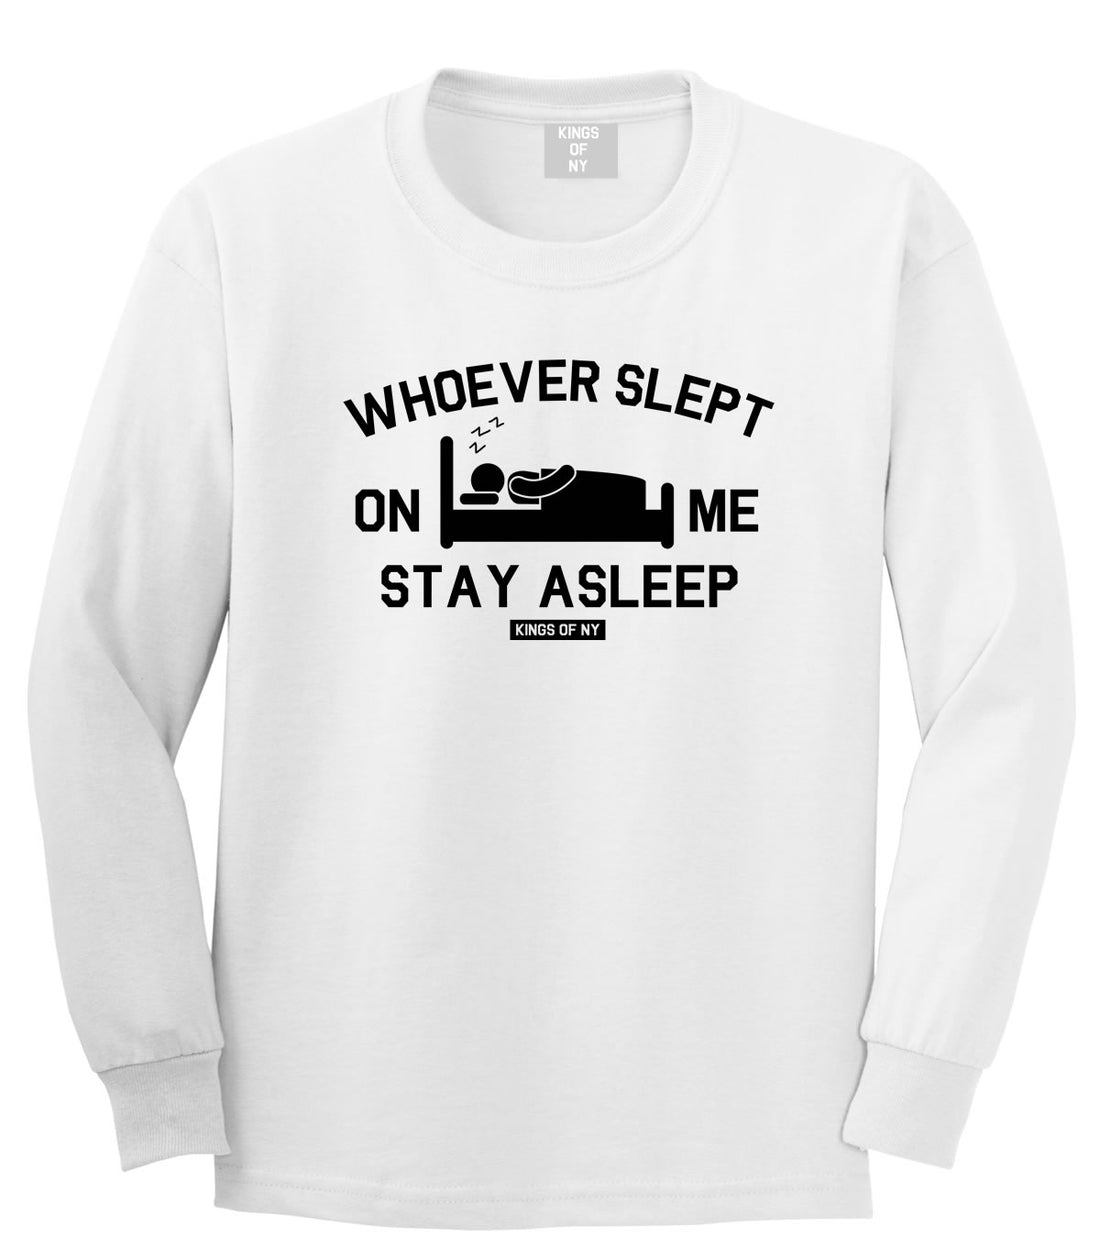 Whoever Slept On Me Stay Asleep Mens Long Sleeve T-Shirt White by Kings Of NY